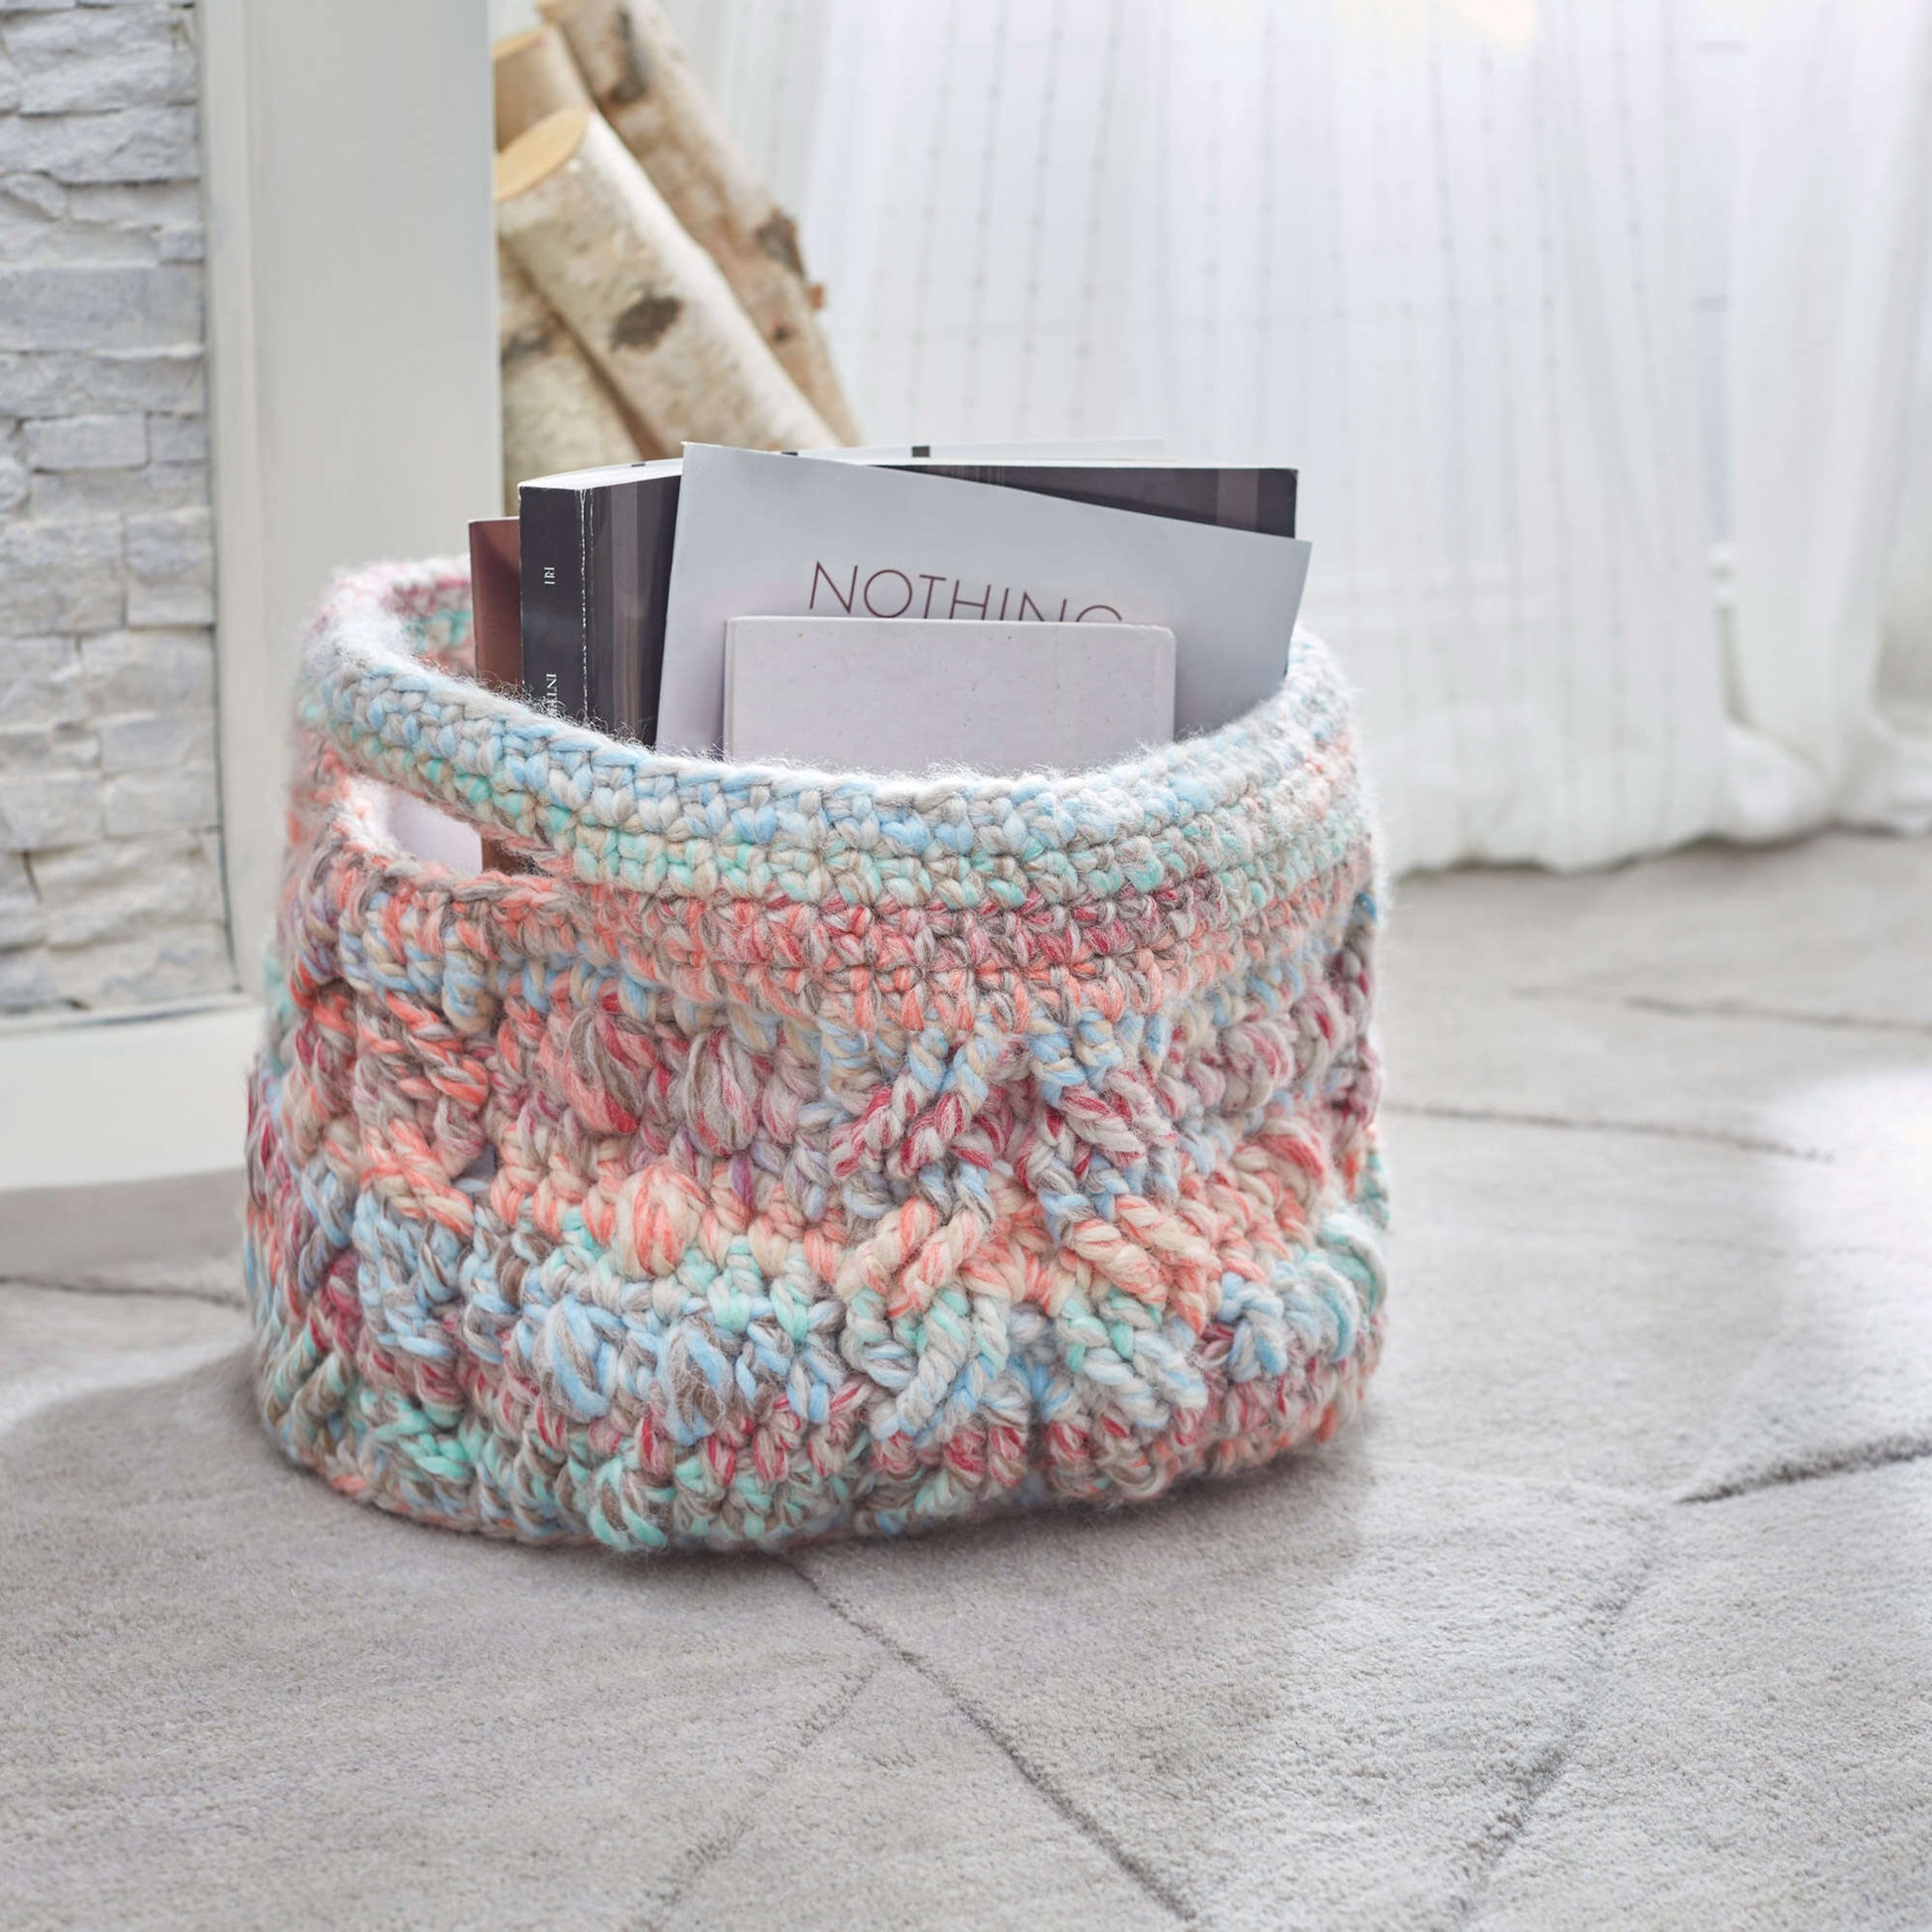 Free Red Heart Cabled Basket Crochet Pattern